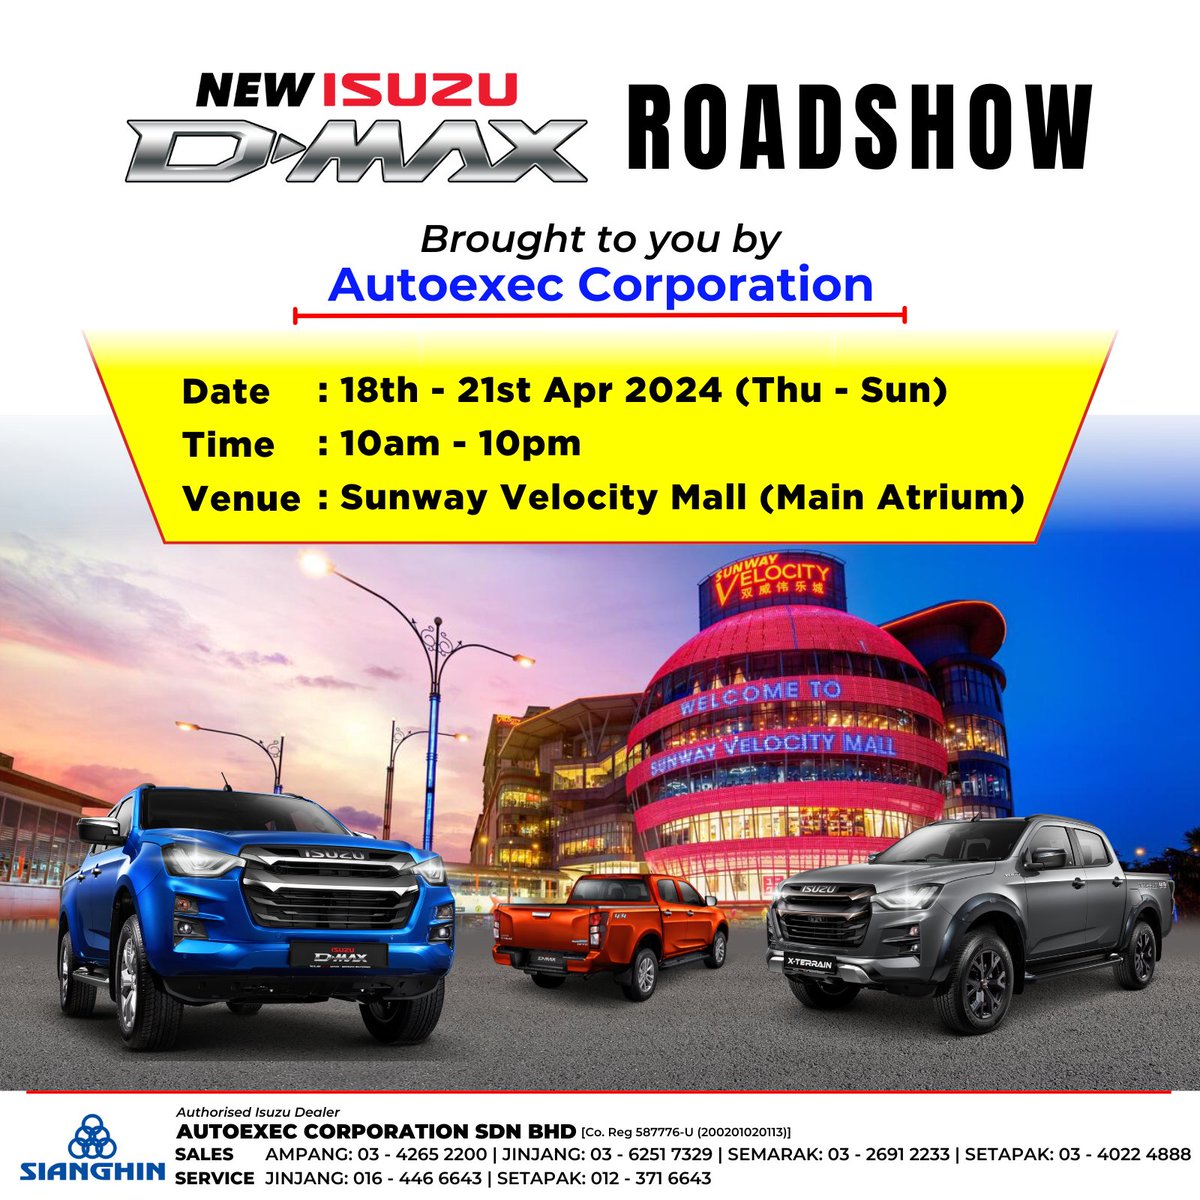 Join us at #SunwayVelocityMall for our #IsuzuDMax Roadshow from today until 21st April, 10am-10pm. See you there!

#Sianghin #Autoexec #IsuzuAmpang #IsuzuJinjang #IsuzuSemarak #IsuzuSetapak #Isuzu #IsuzuDMaxMalaysia #BreakingBoundaries #LiveLimitless